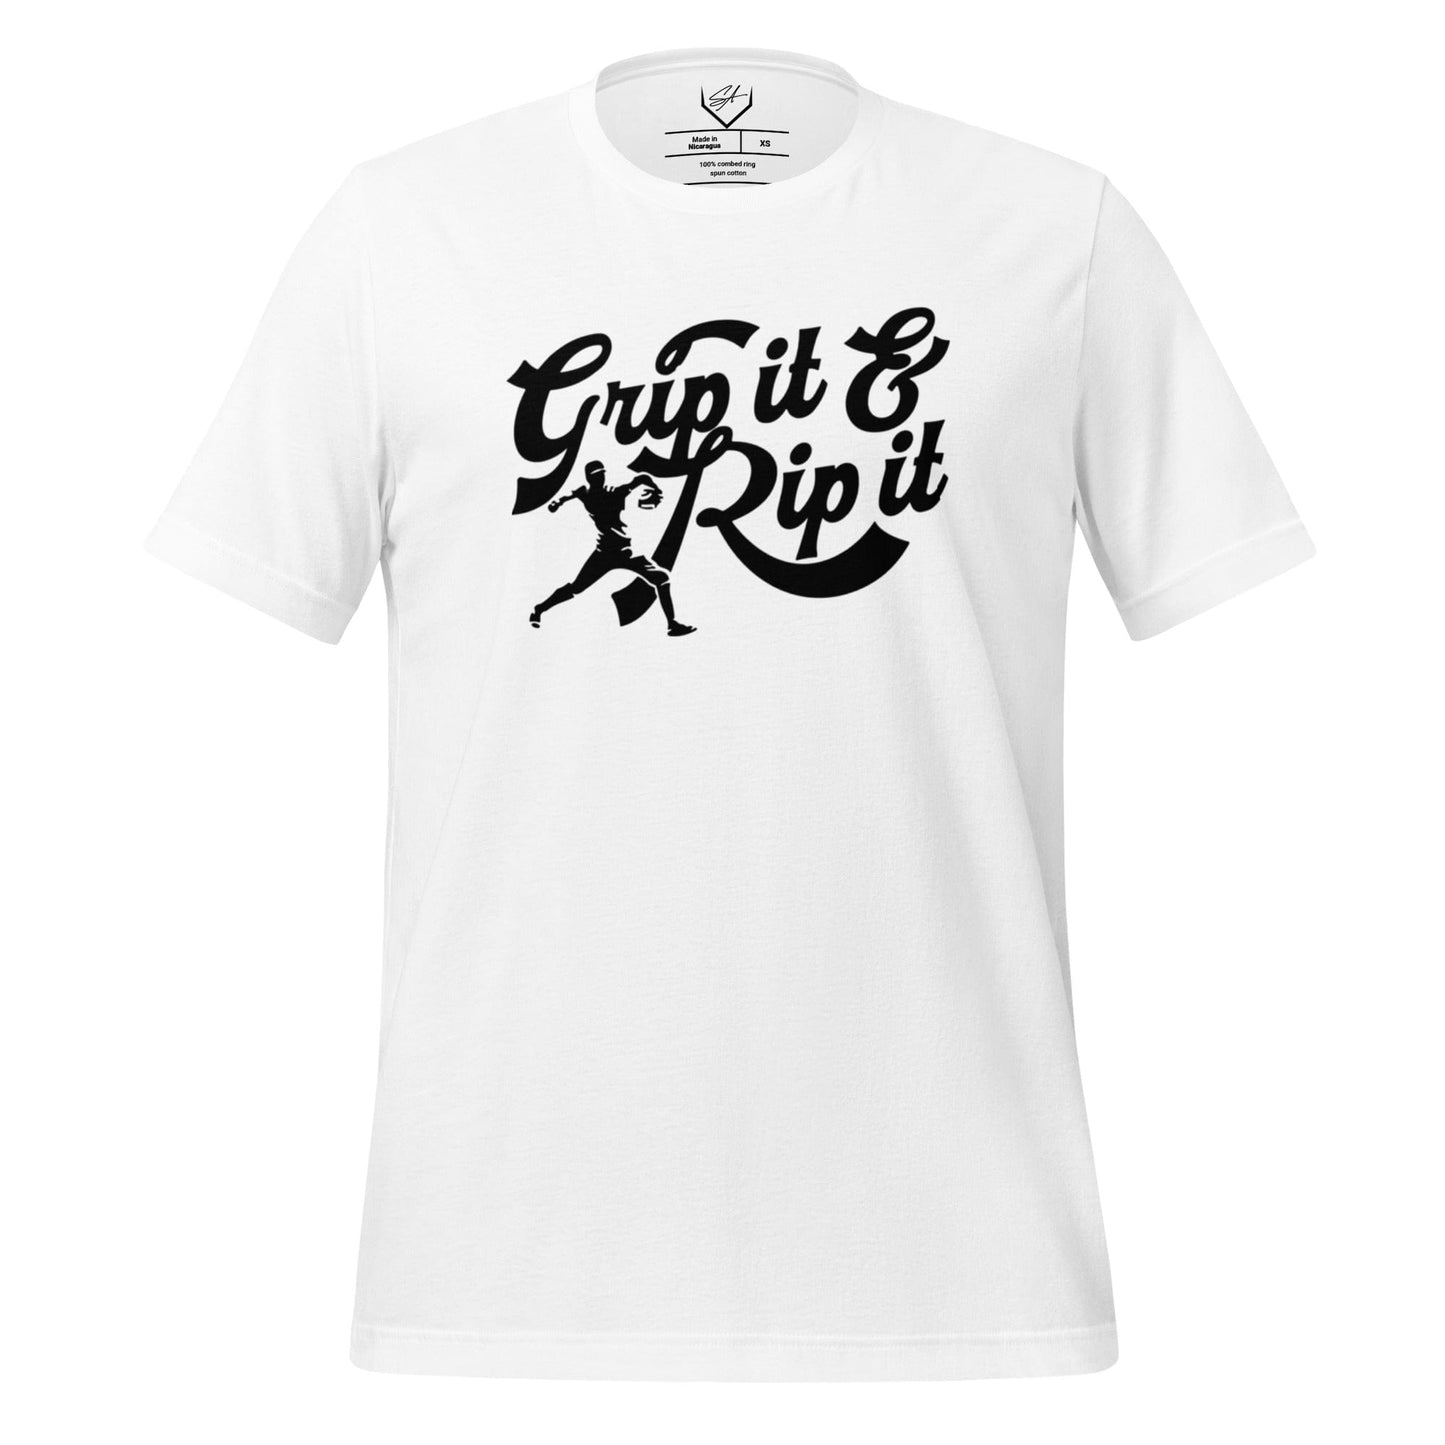 Grip It And Rip It - Adult Tee